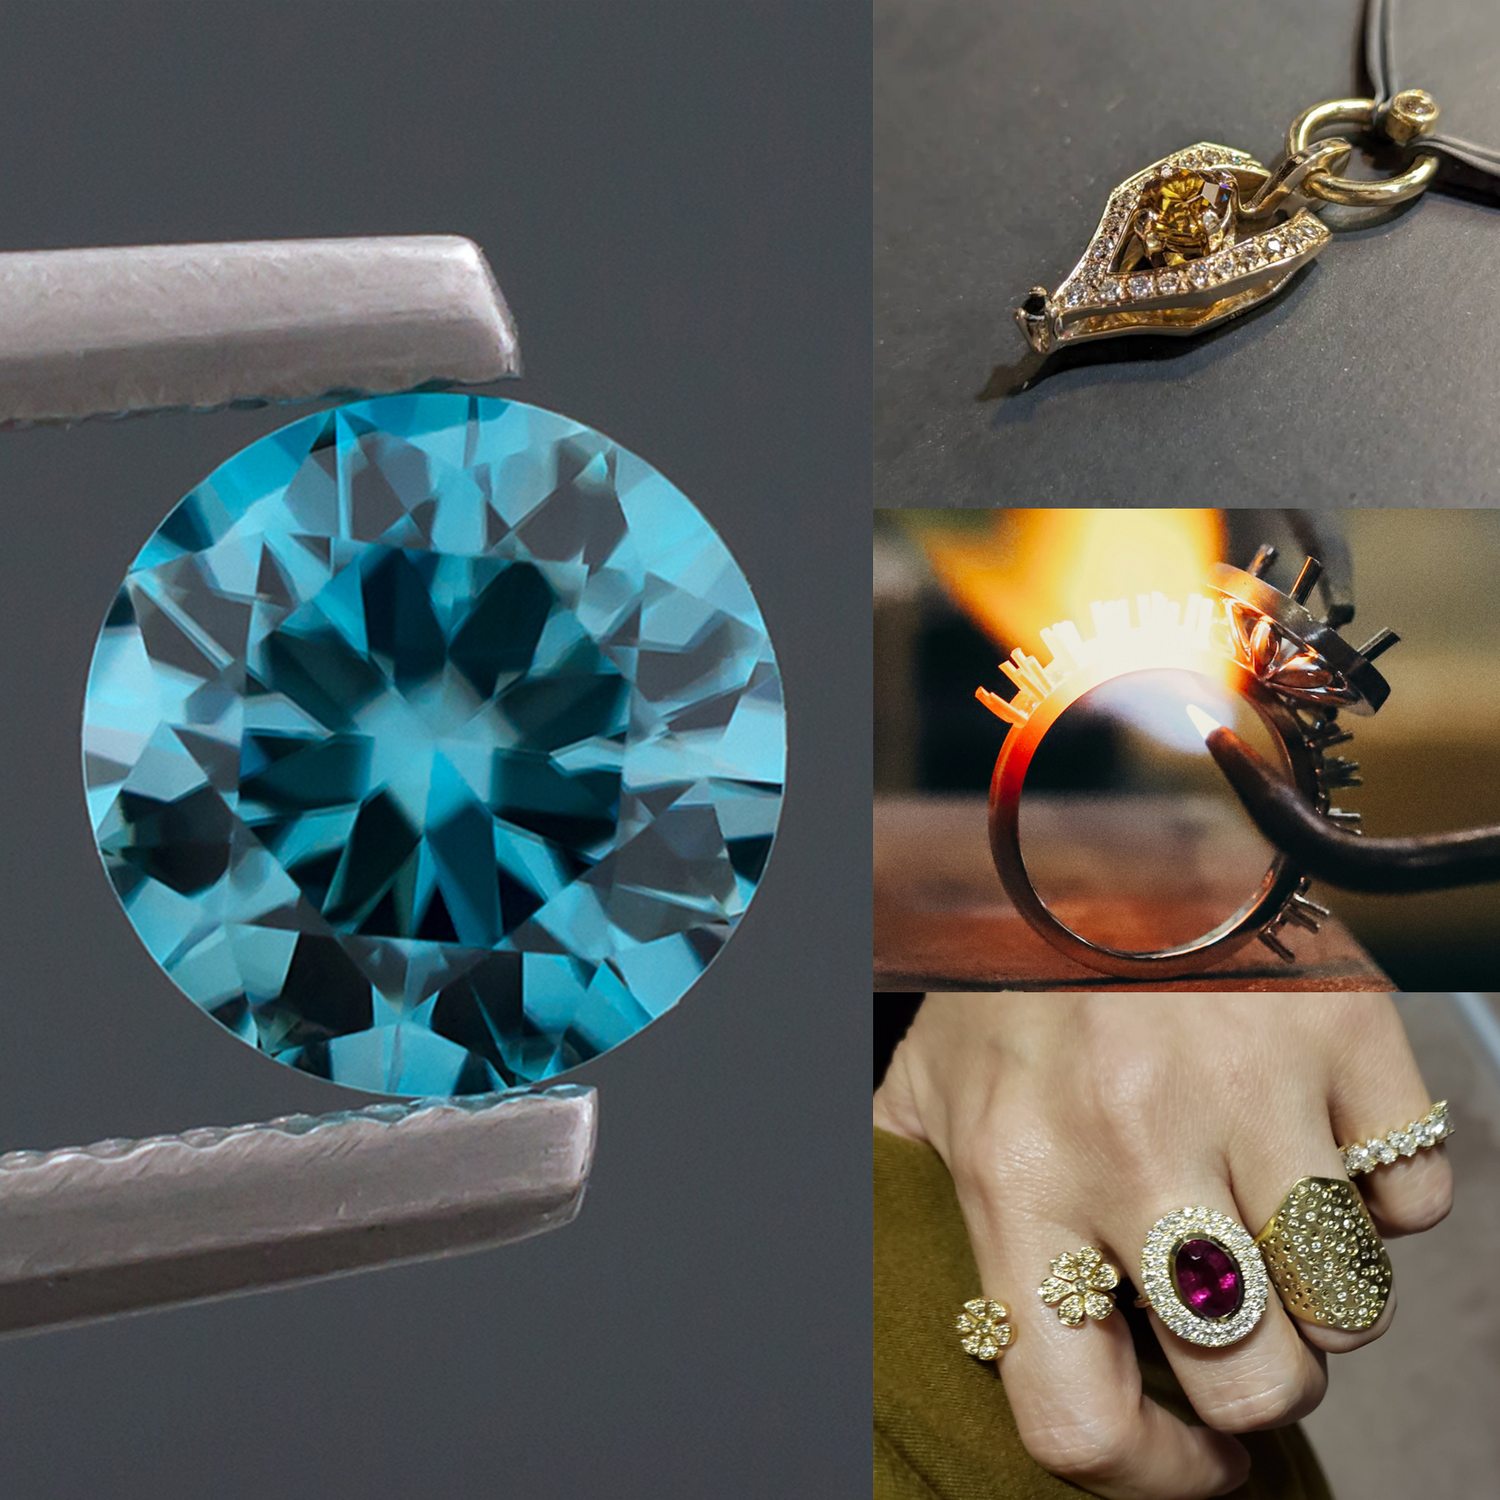 Loose, Natural-Colored Gemstones Being Used For Handmade Jewelry